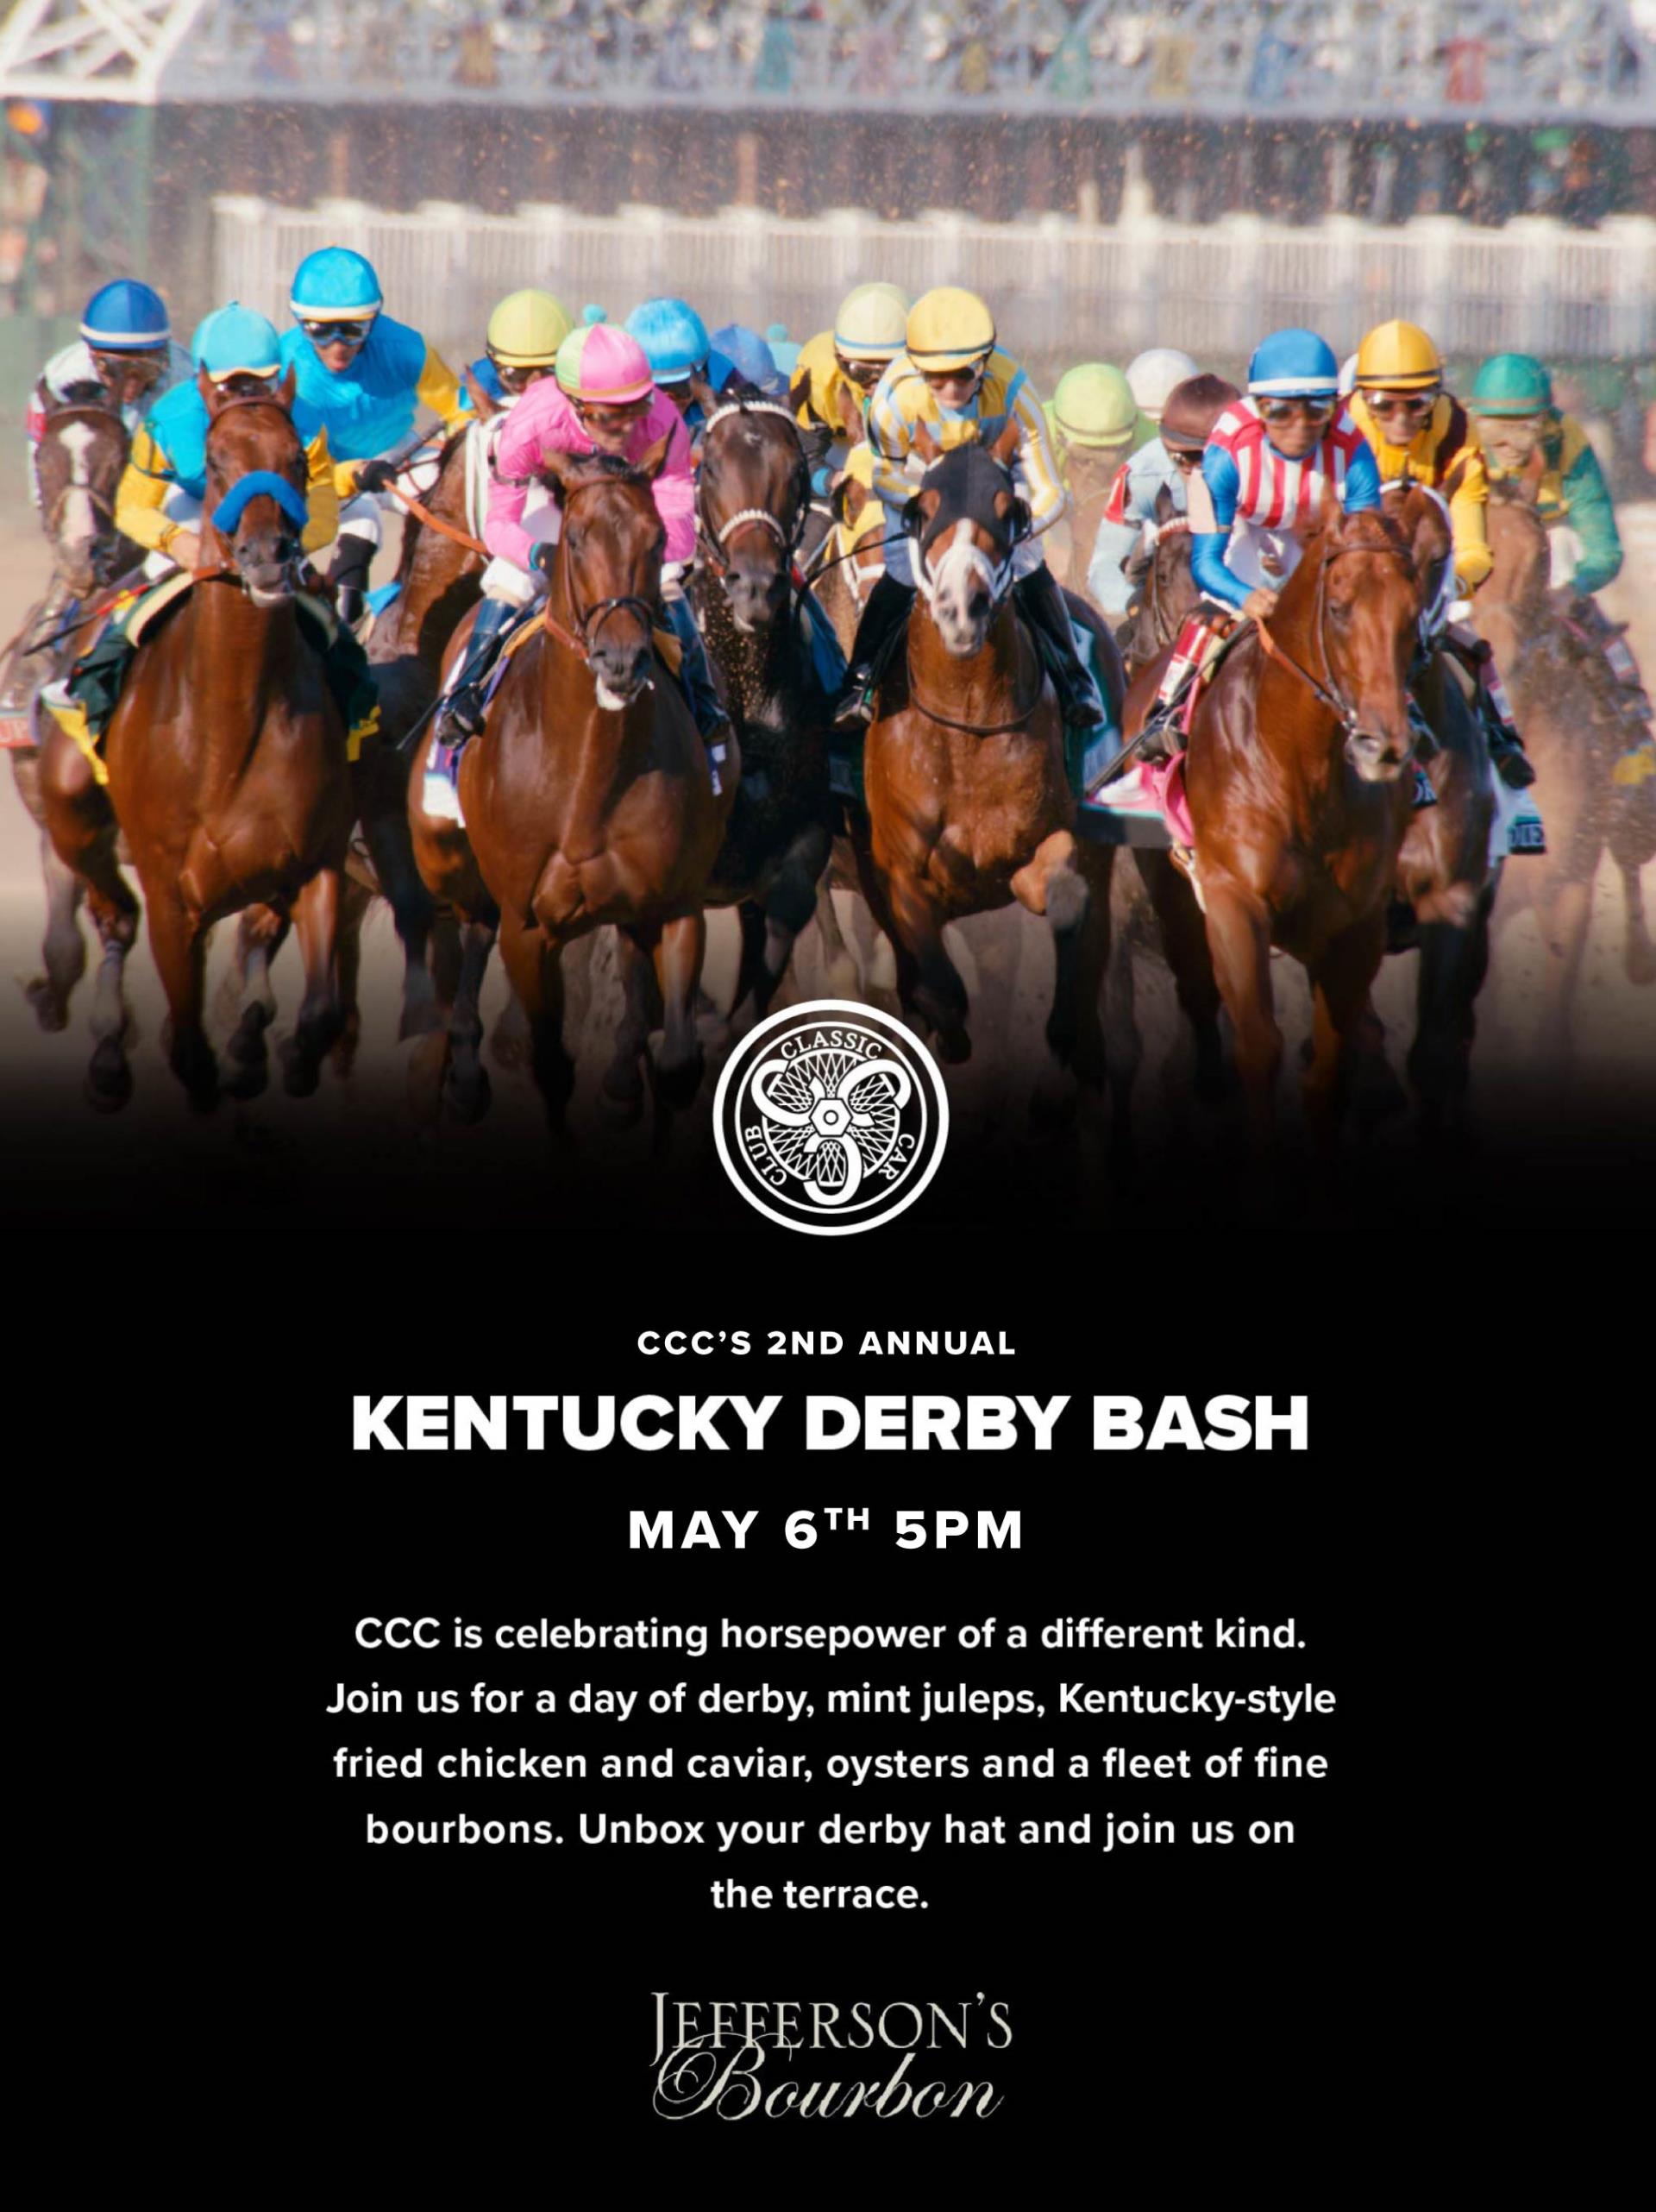 CCC's Annual Kentucky Derby Event